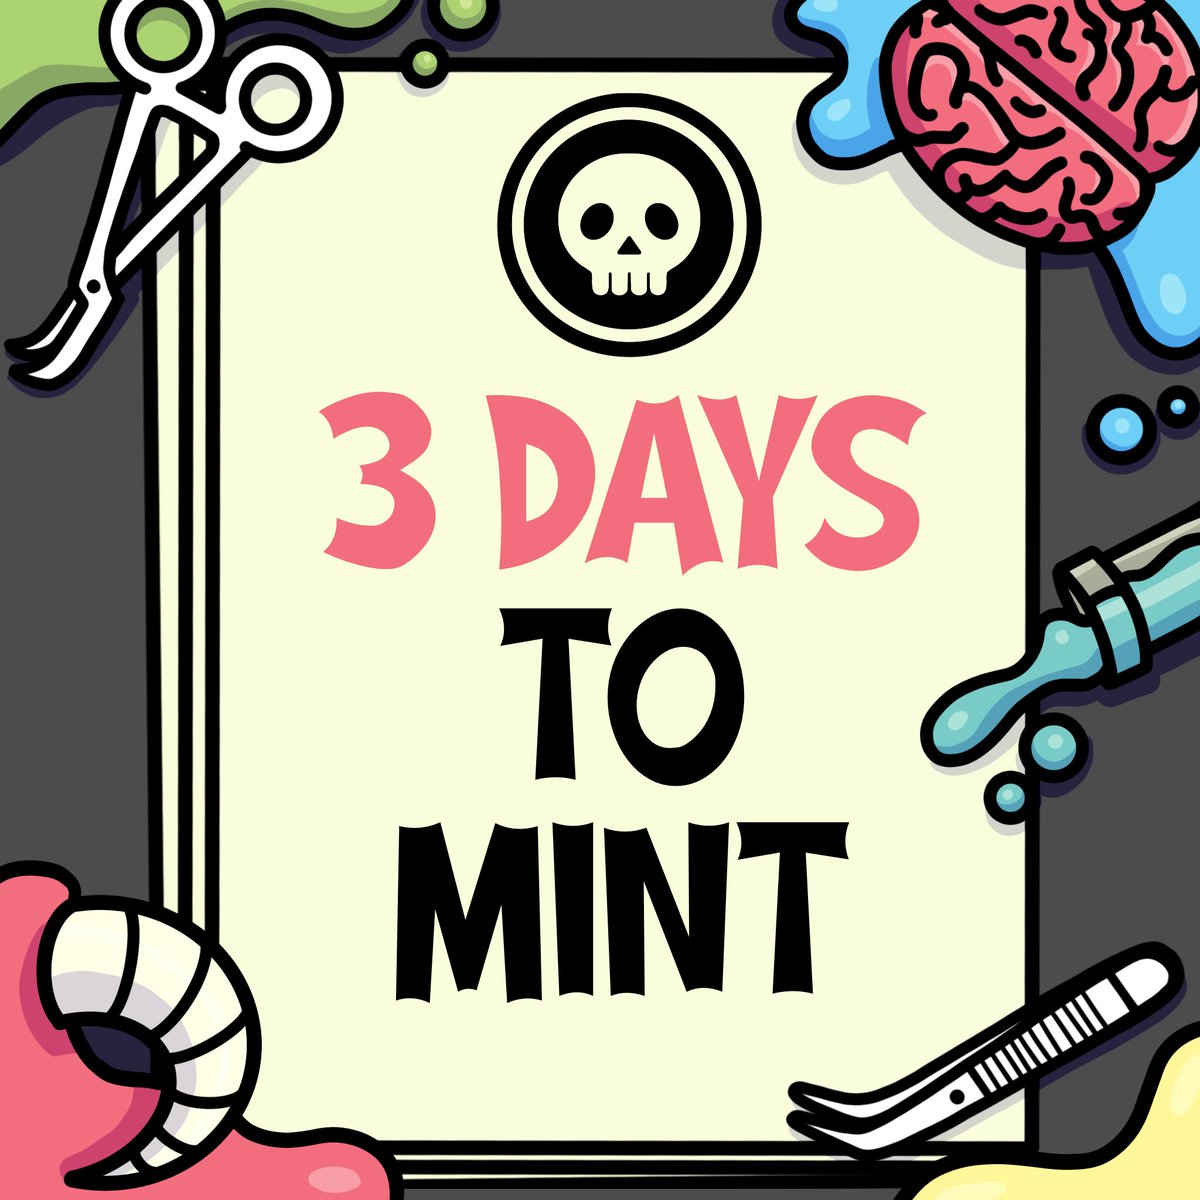 Three days until we mint! ⁣Don't forget to mark your calendars. It's sure to be...monstrous. 💀 Like, RT and drop your wallet address. We're picking 5 last-minute winners.